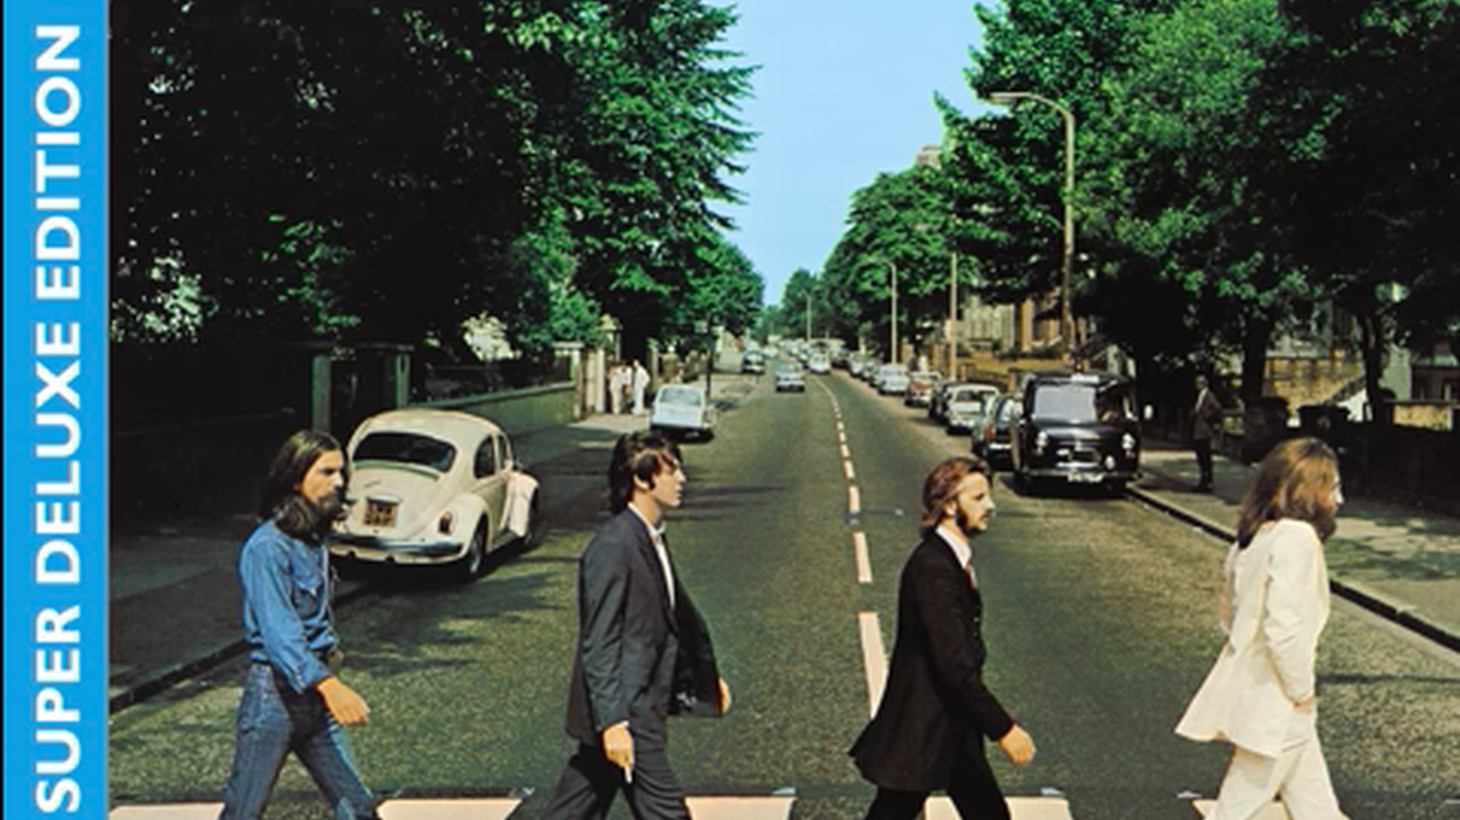 The Beatles wrote fondly of Queen Elizabeth in a short, hidden track called “Her Majesty” on their 1969 album “Abbey Road.”